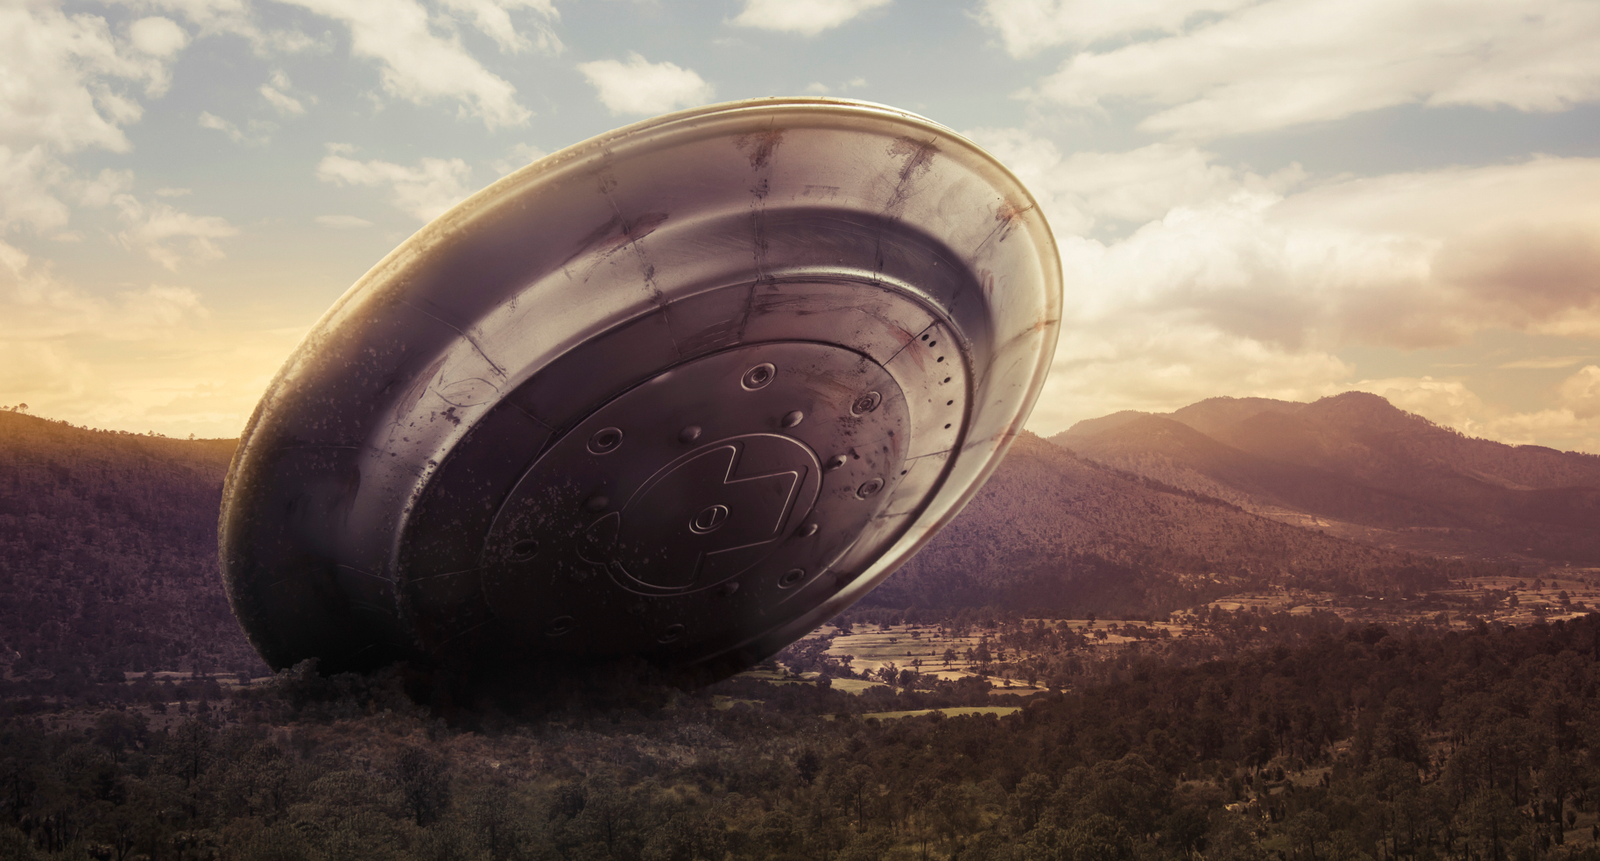 Claims reveal an absurd amount of UFOs may be recovered by the US government